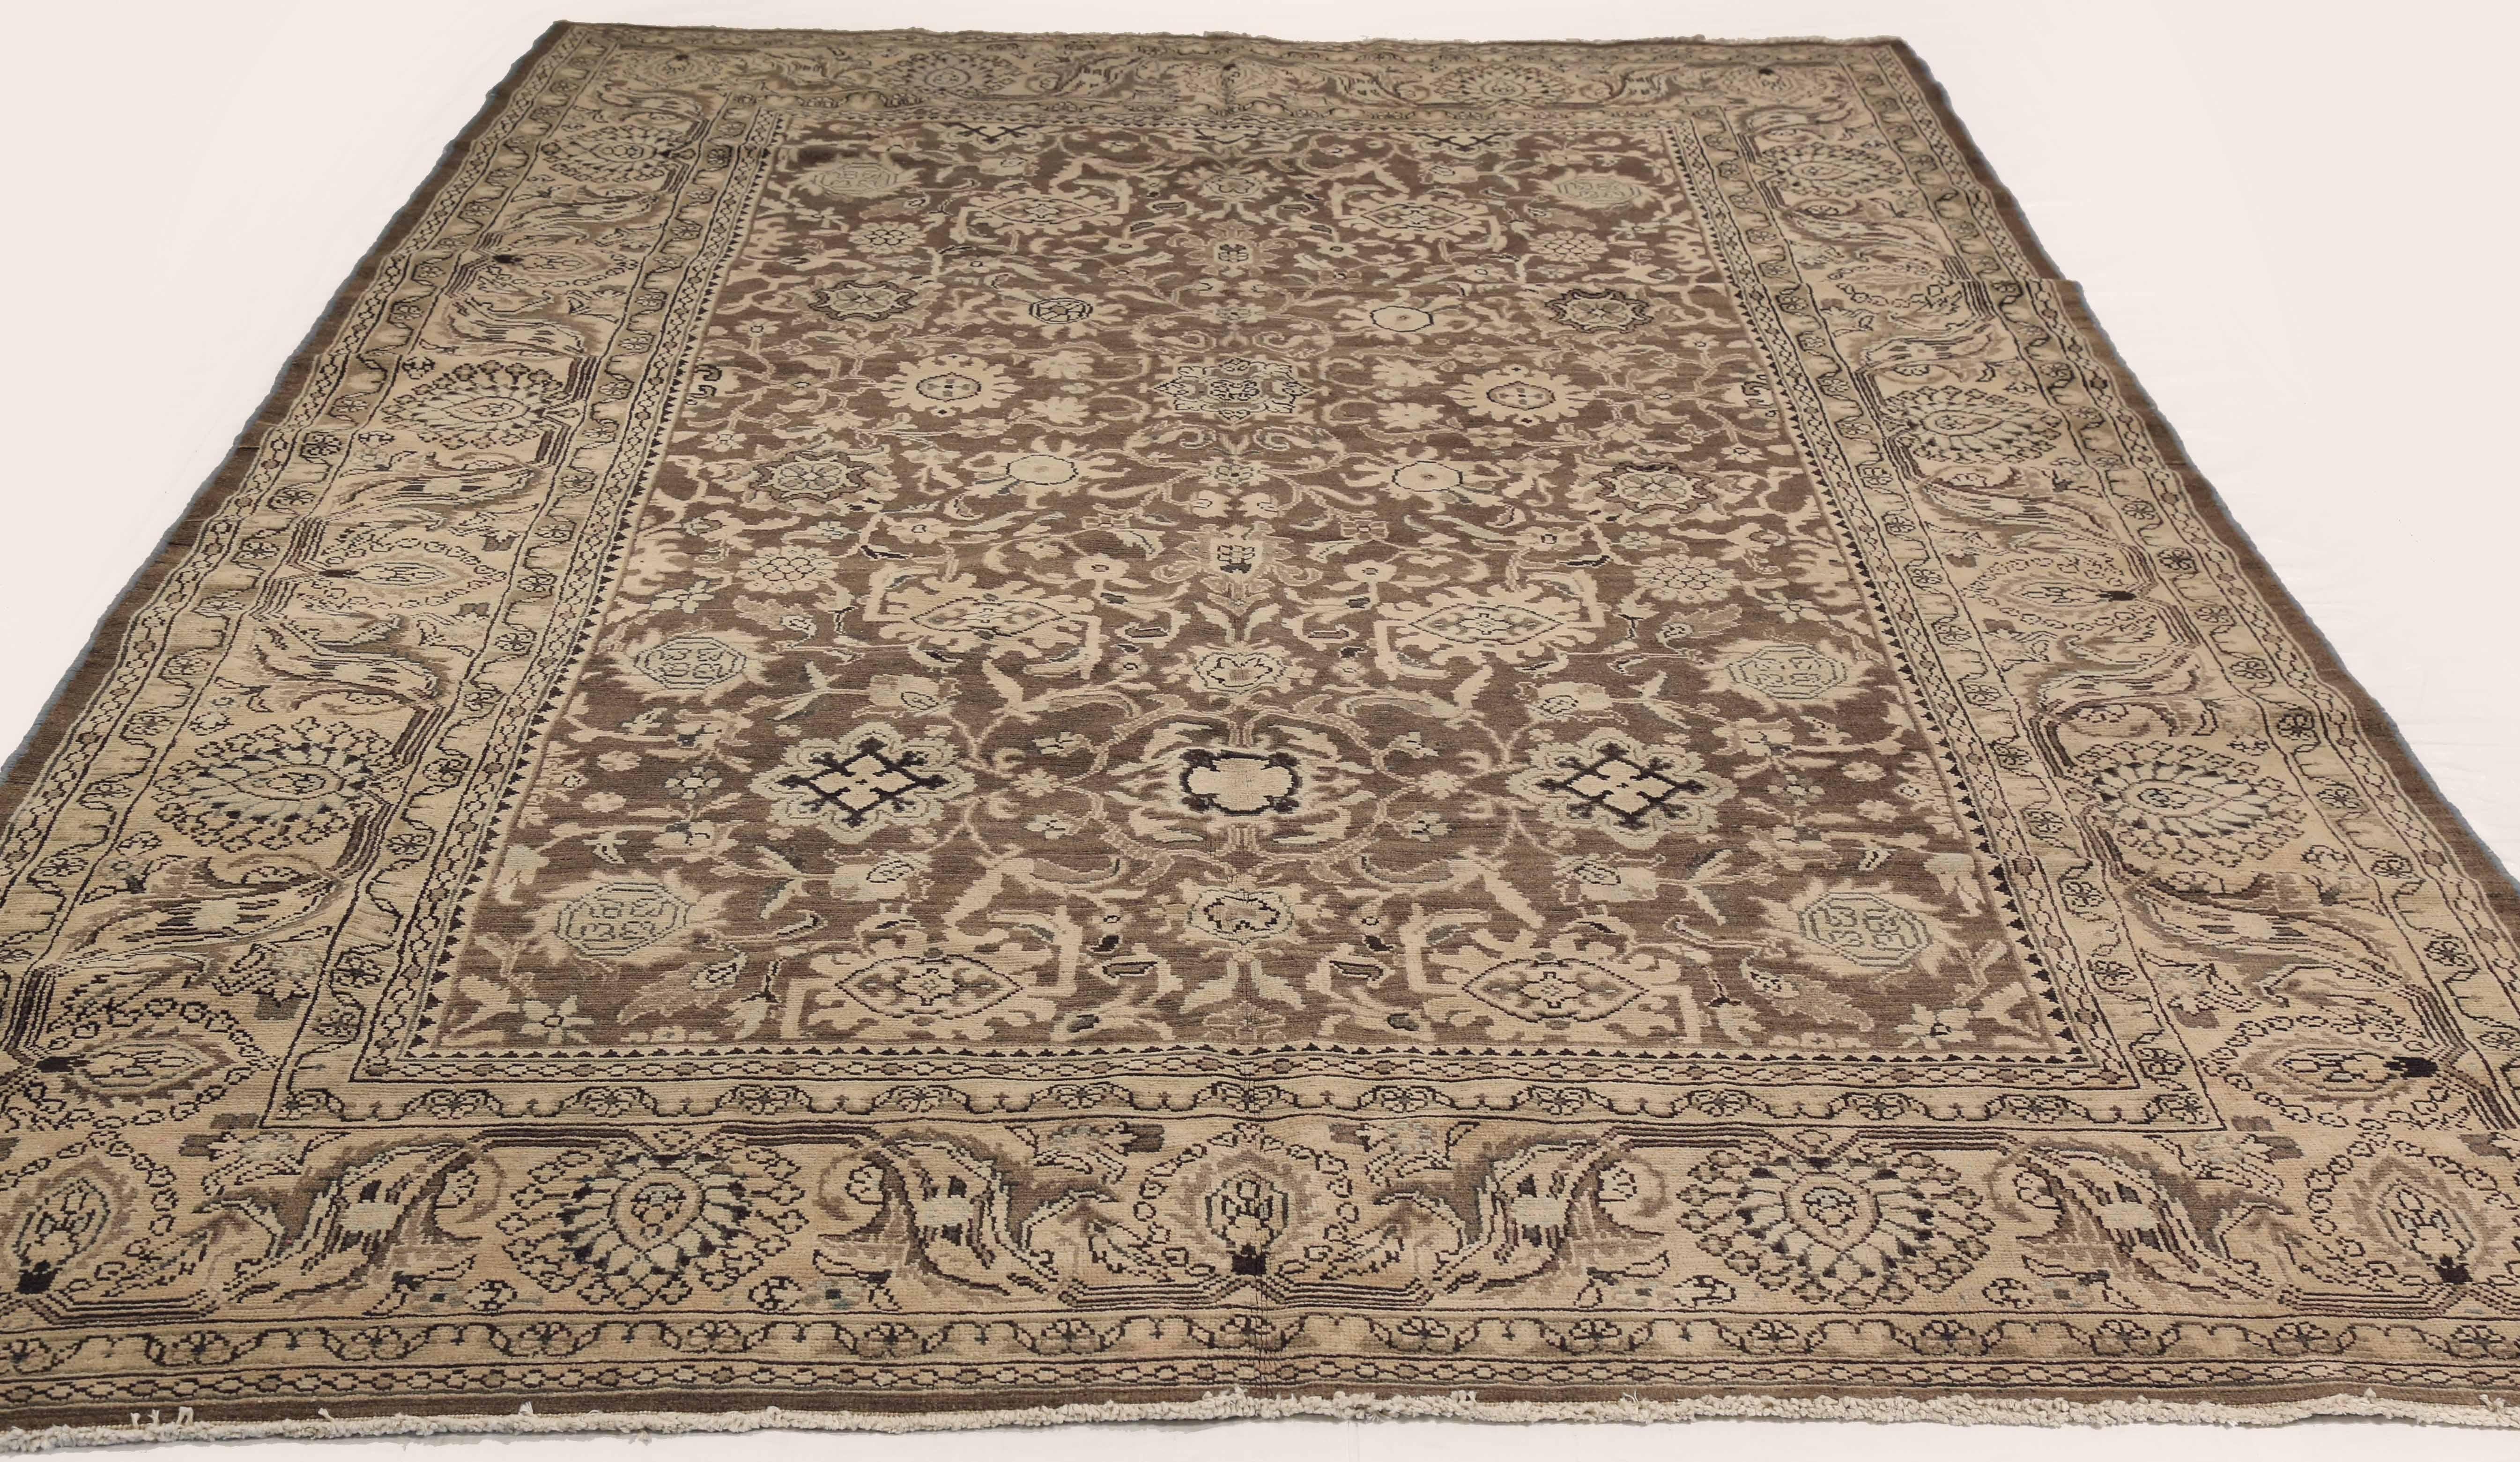 Antique Persian area rug handwoven from the finest sheep’s wool. It’s colored with all-natural vegetable dyes that are safe for humans and pets. It’s a traditional Malayer design handwoven by expert artisans. It’s a lovely area rug that can be